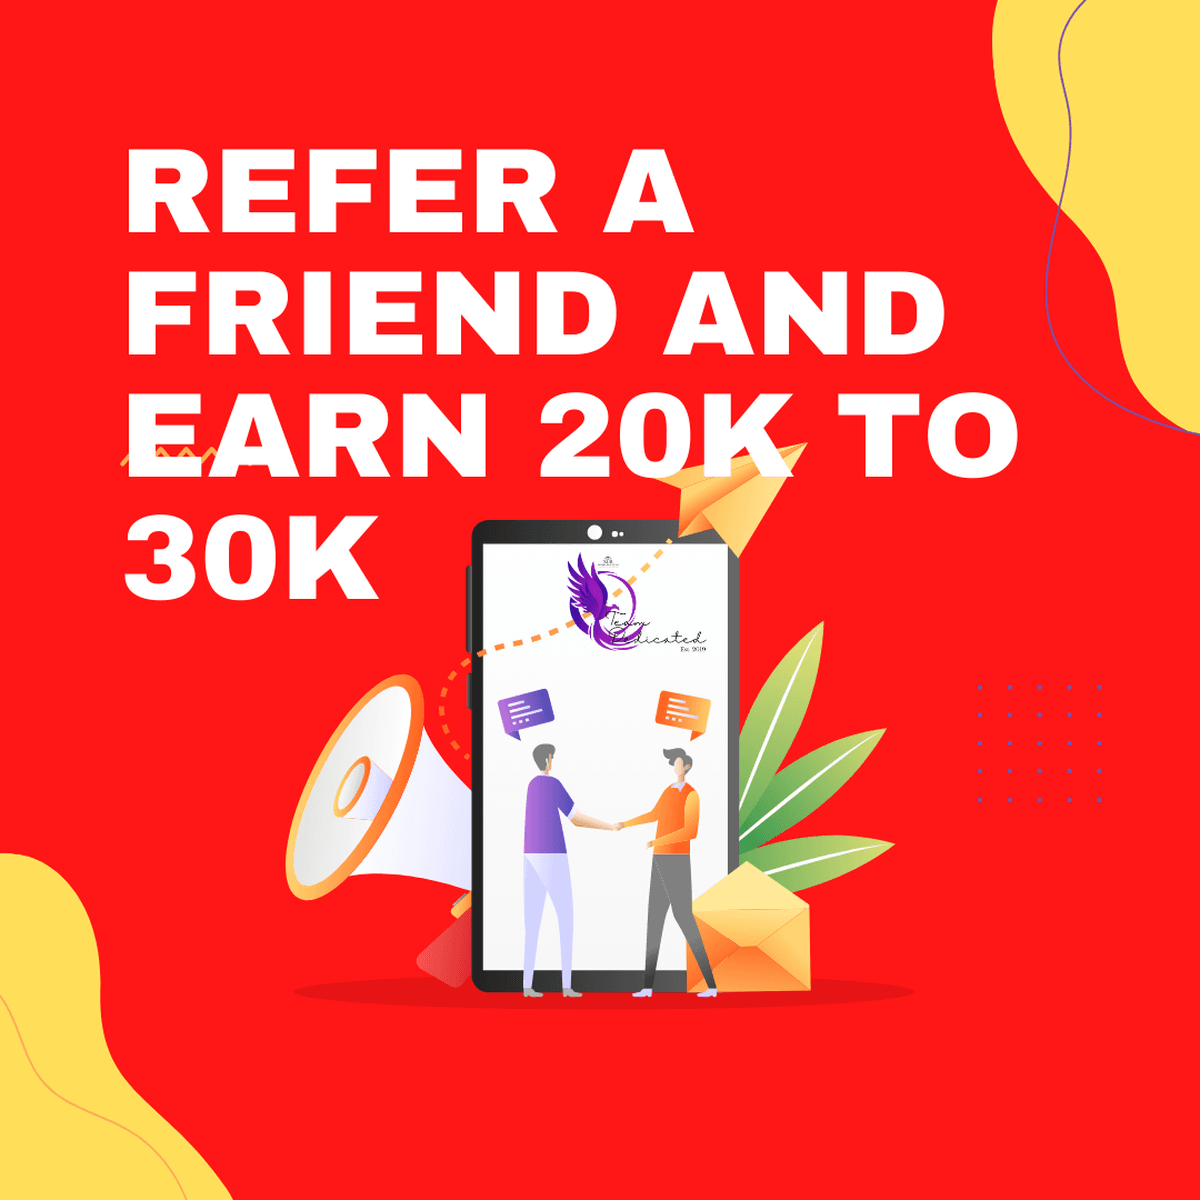 Refer and Earn 20K to 30K